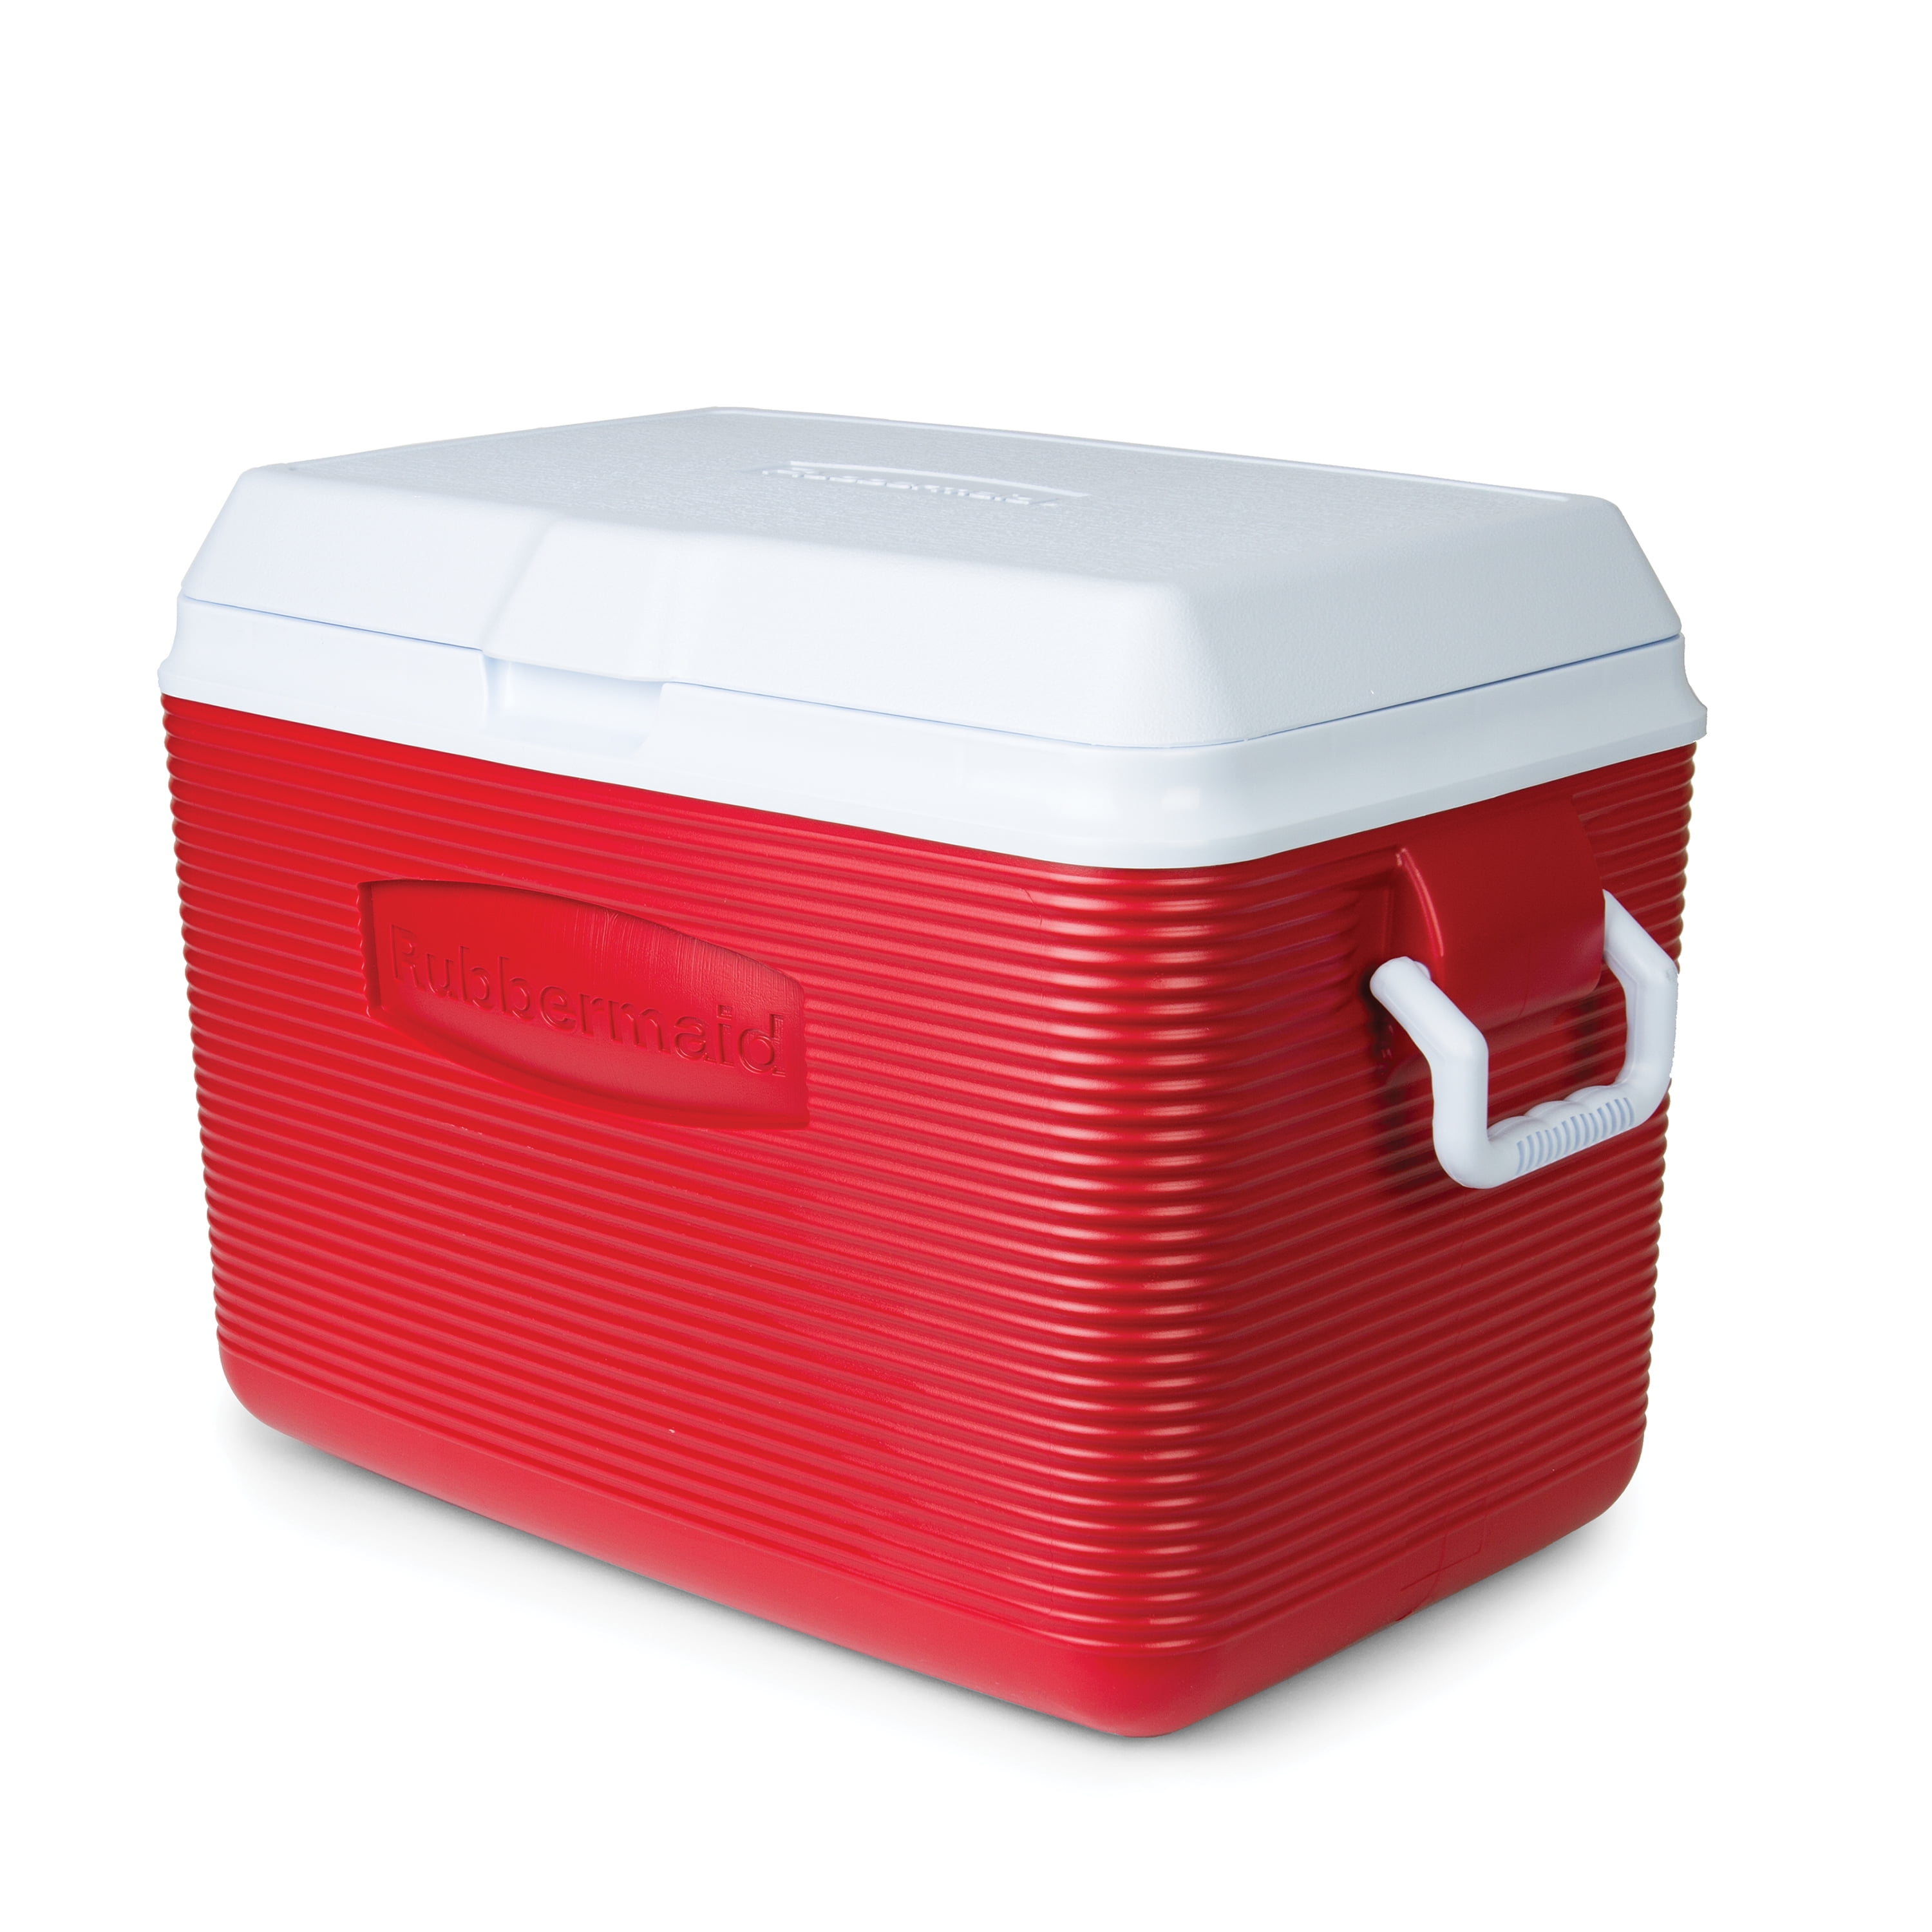 Not cool, Rubbermaid: This cheap cooler is just about useless - CNET